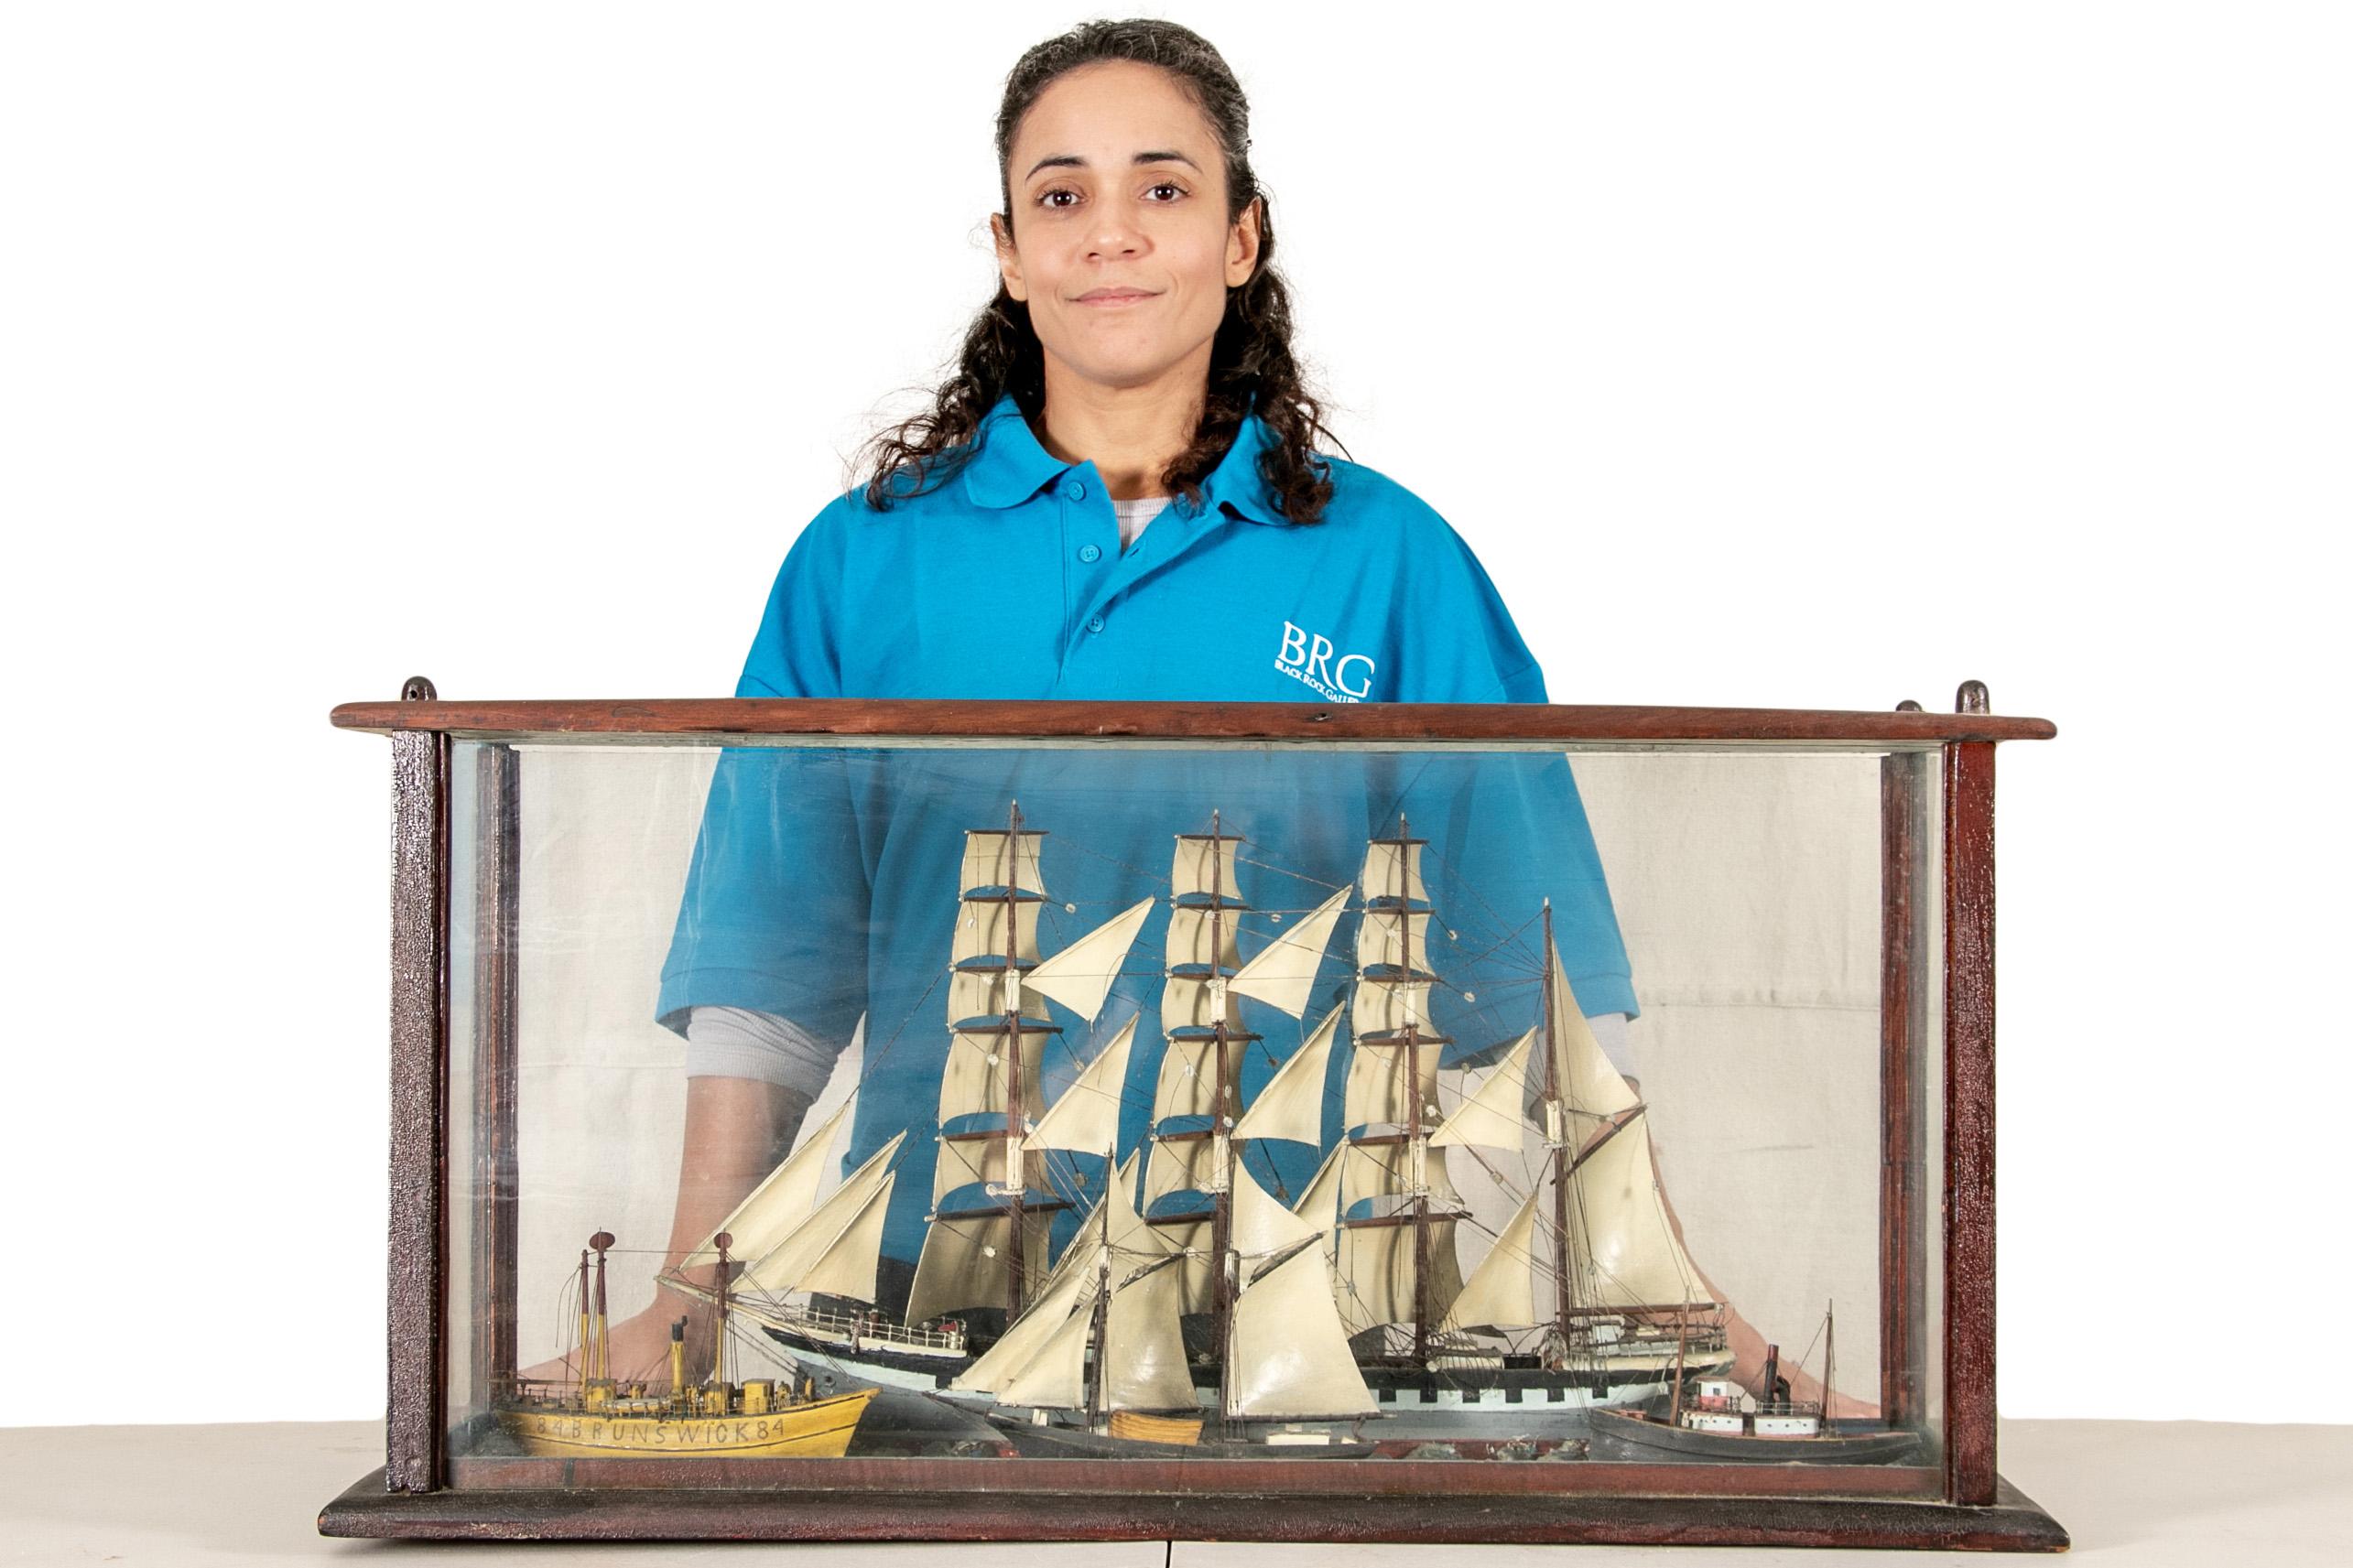 An impressive and unusual 19th century cased ship diorama displaying four ships at sea. A four masted schooner sets the background with a tug boat, two masted vessel and a steamship labeled 